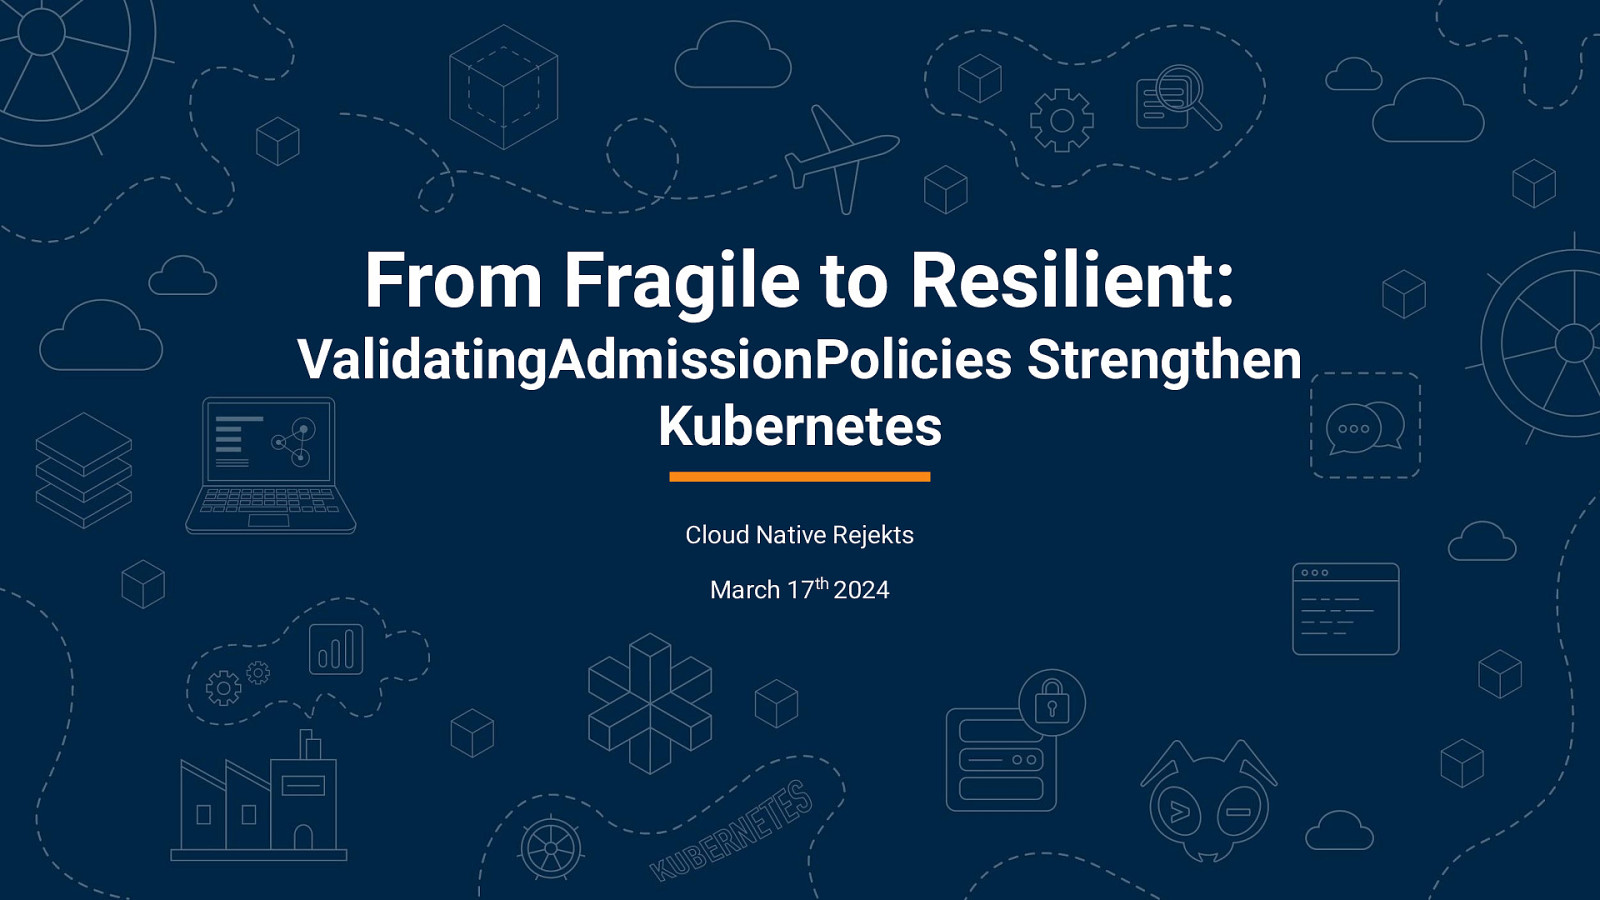 From Fragile to Resilient: ValidatingAdmissionPolicies Strengthen Kubernetes